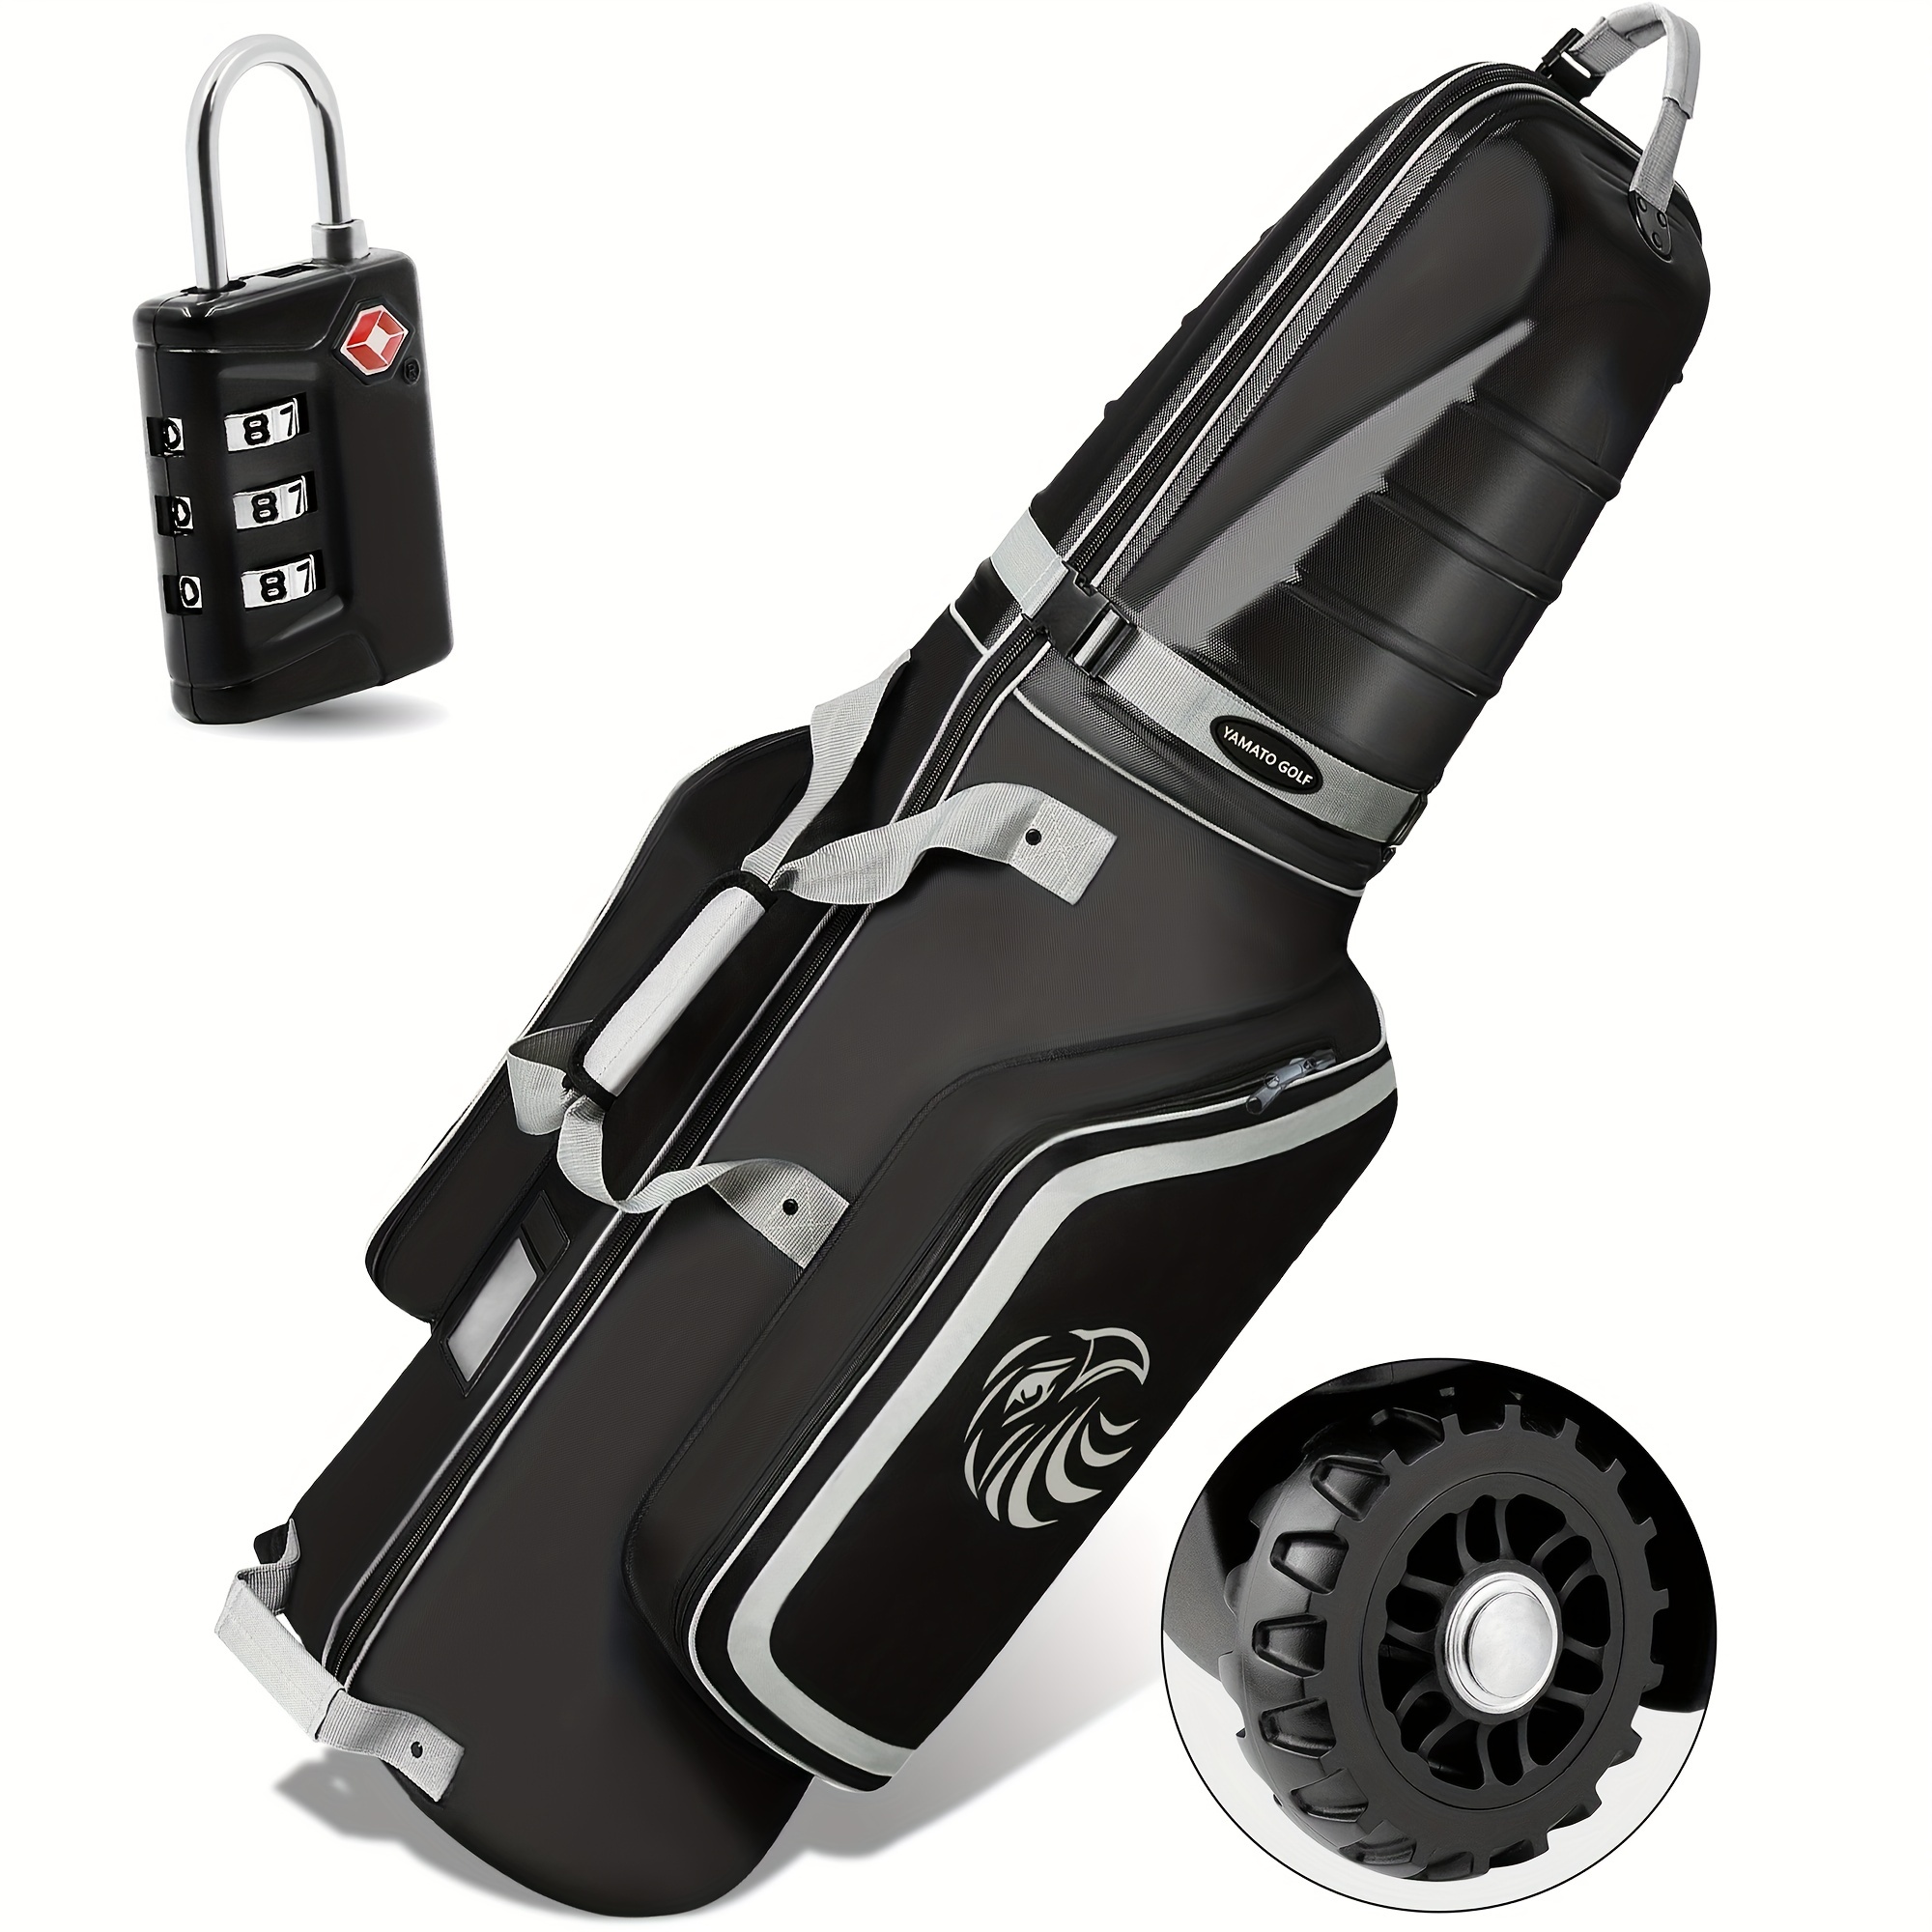 Golf Travel Bags For Airlines With Wheels Padded Around Top Golf